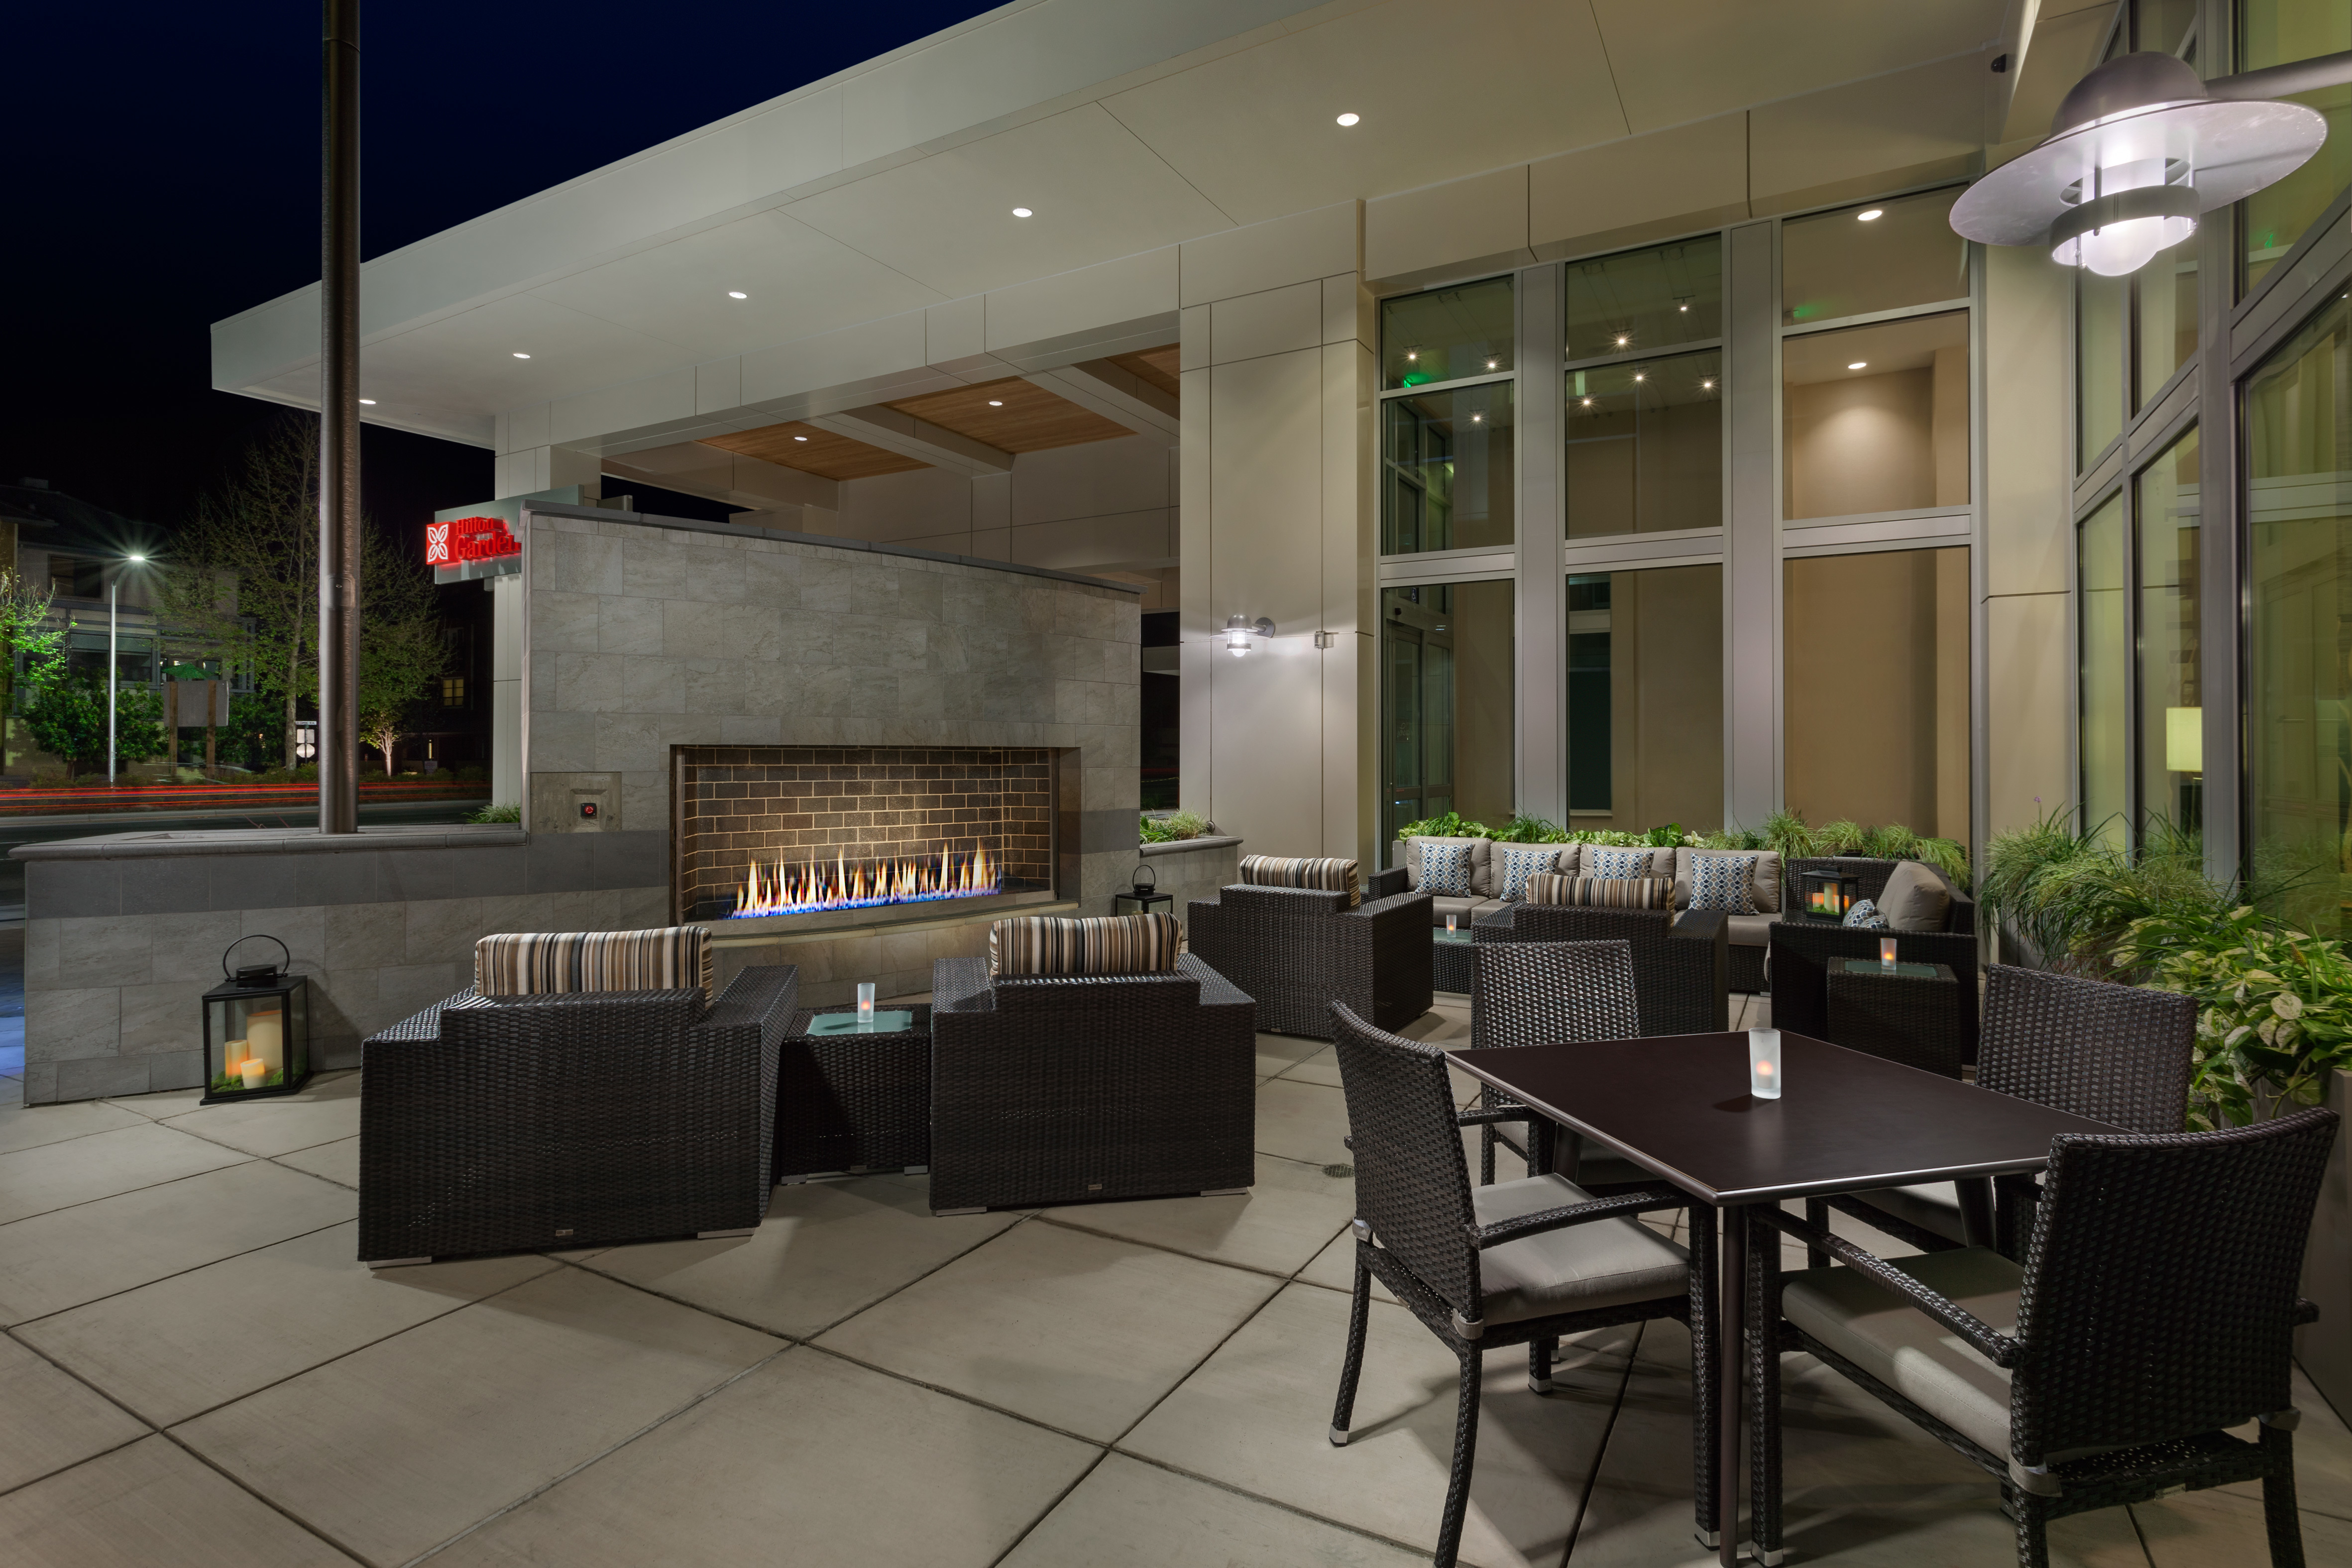 Outdoor Patio with Fireplace